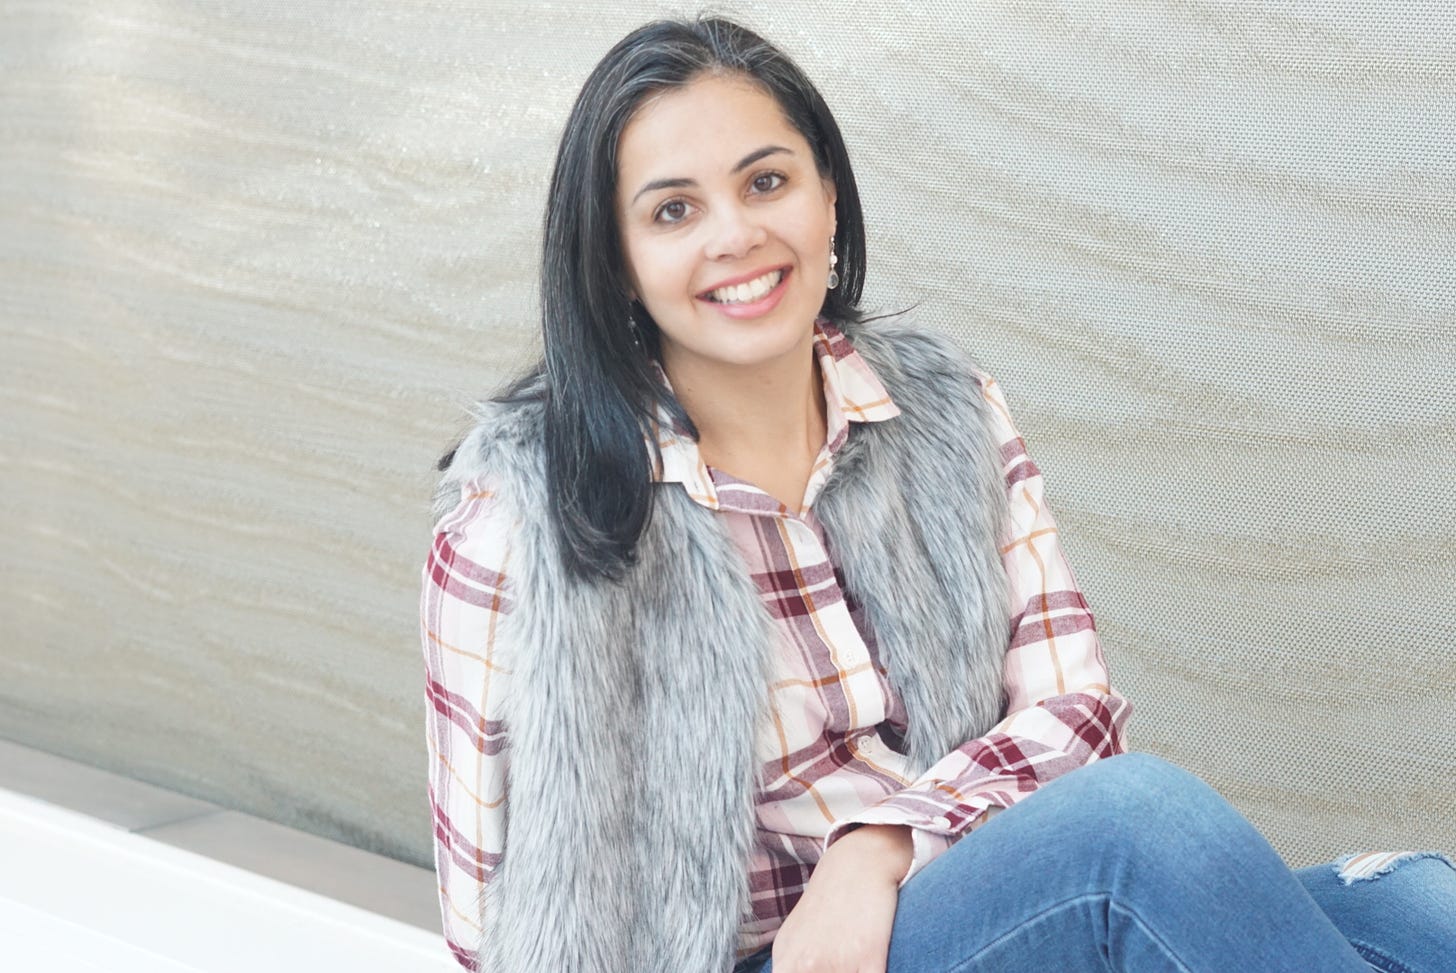 A headshot of Taslim Jaffer, a woman with dark shoulder-length hair smiling at the camera, wearing a plaid shirt, fuzzy grey vest, and jeans